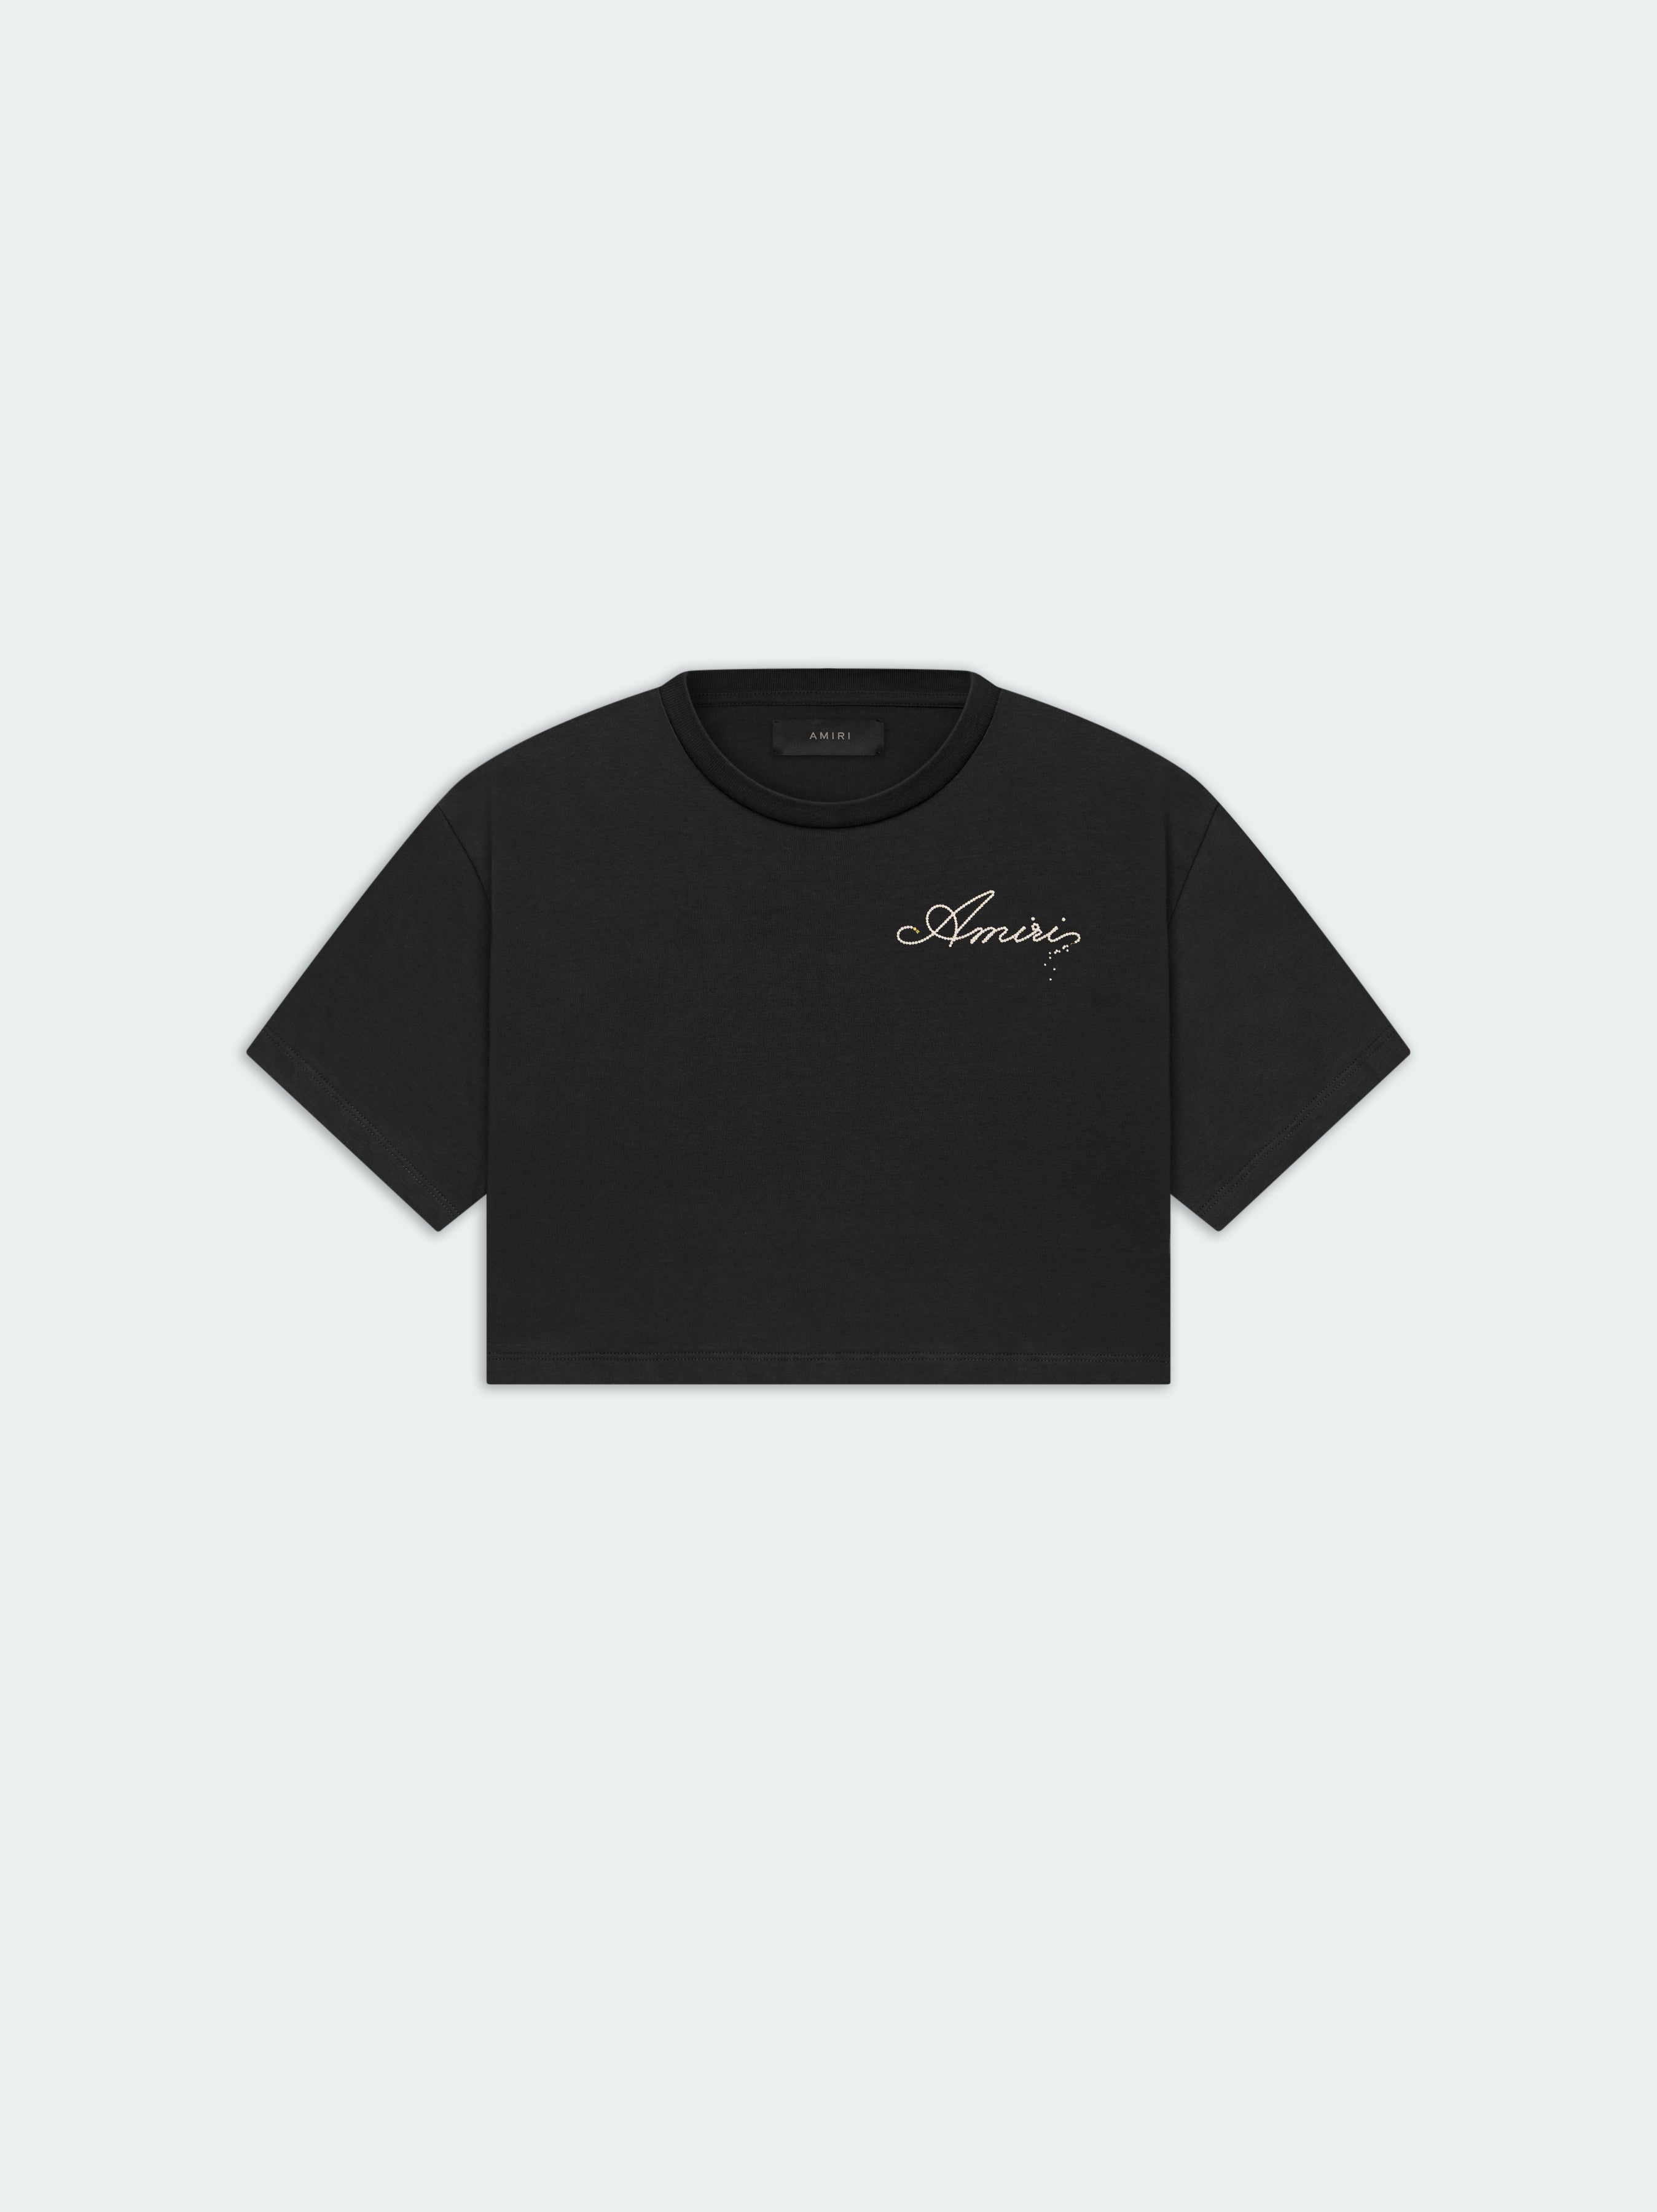 Product WOMEN - CHAMPAGNE CROPPED TEE - Black featured image